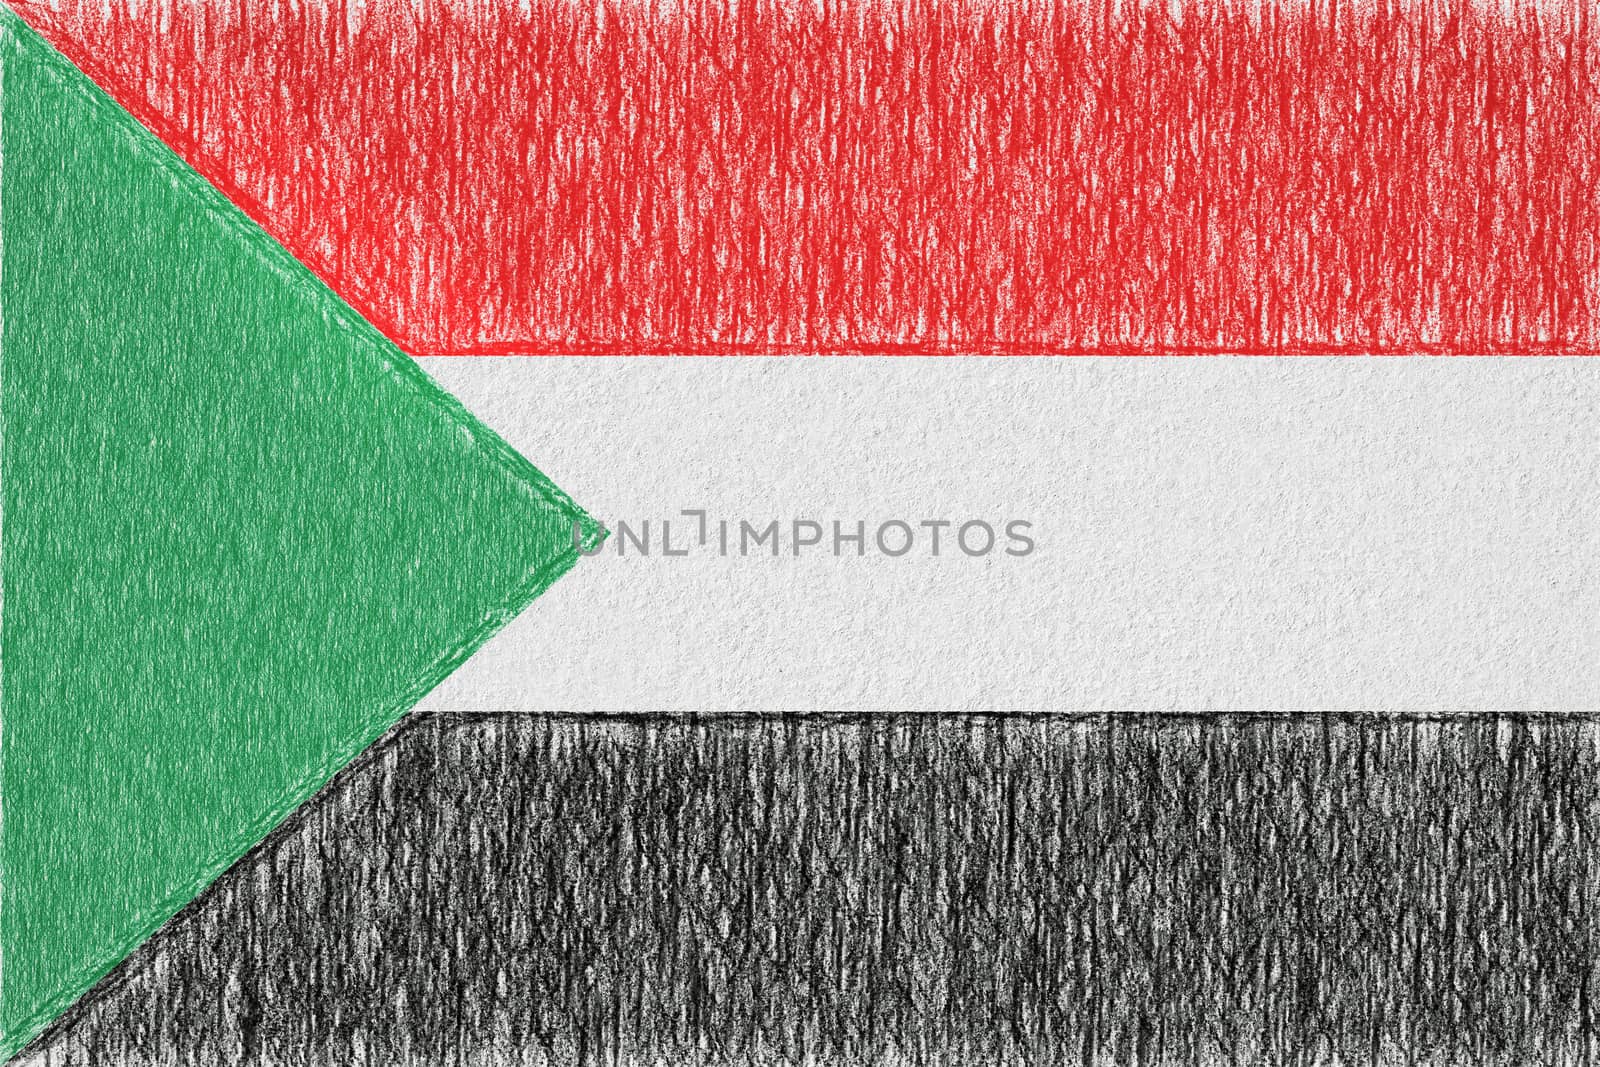 Sudan painted flag. Patriotic drawing on paper background. National flag of Sudan